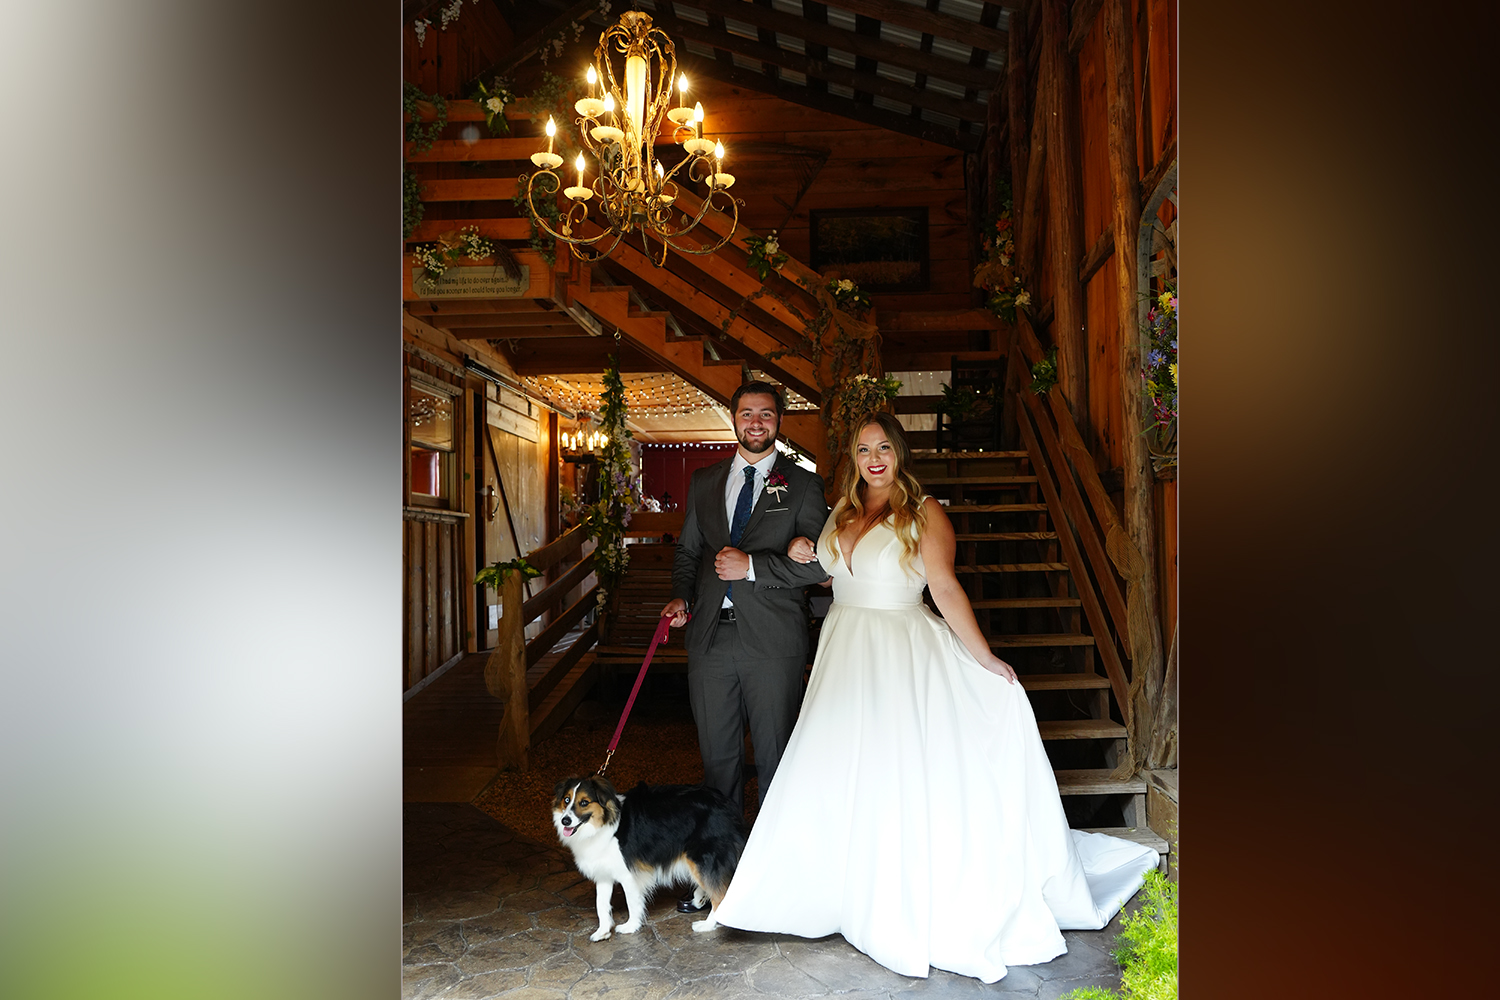 Rustic wedding chandelier with a couple arm in arm with their dog